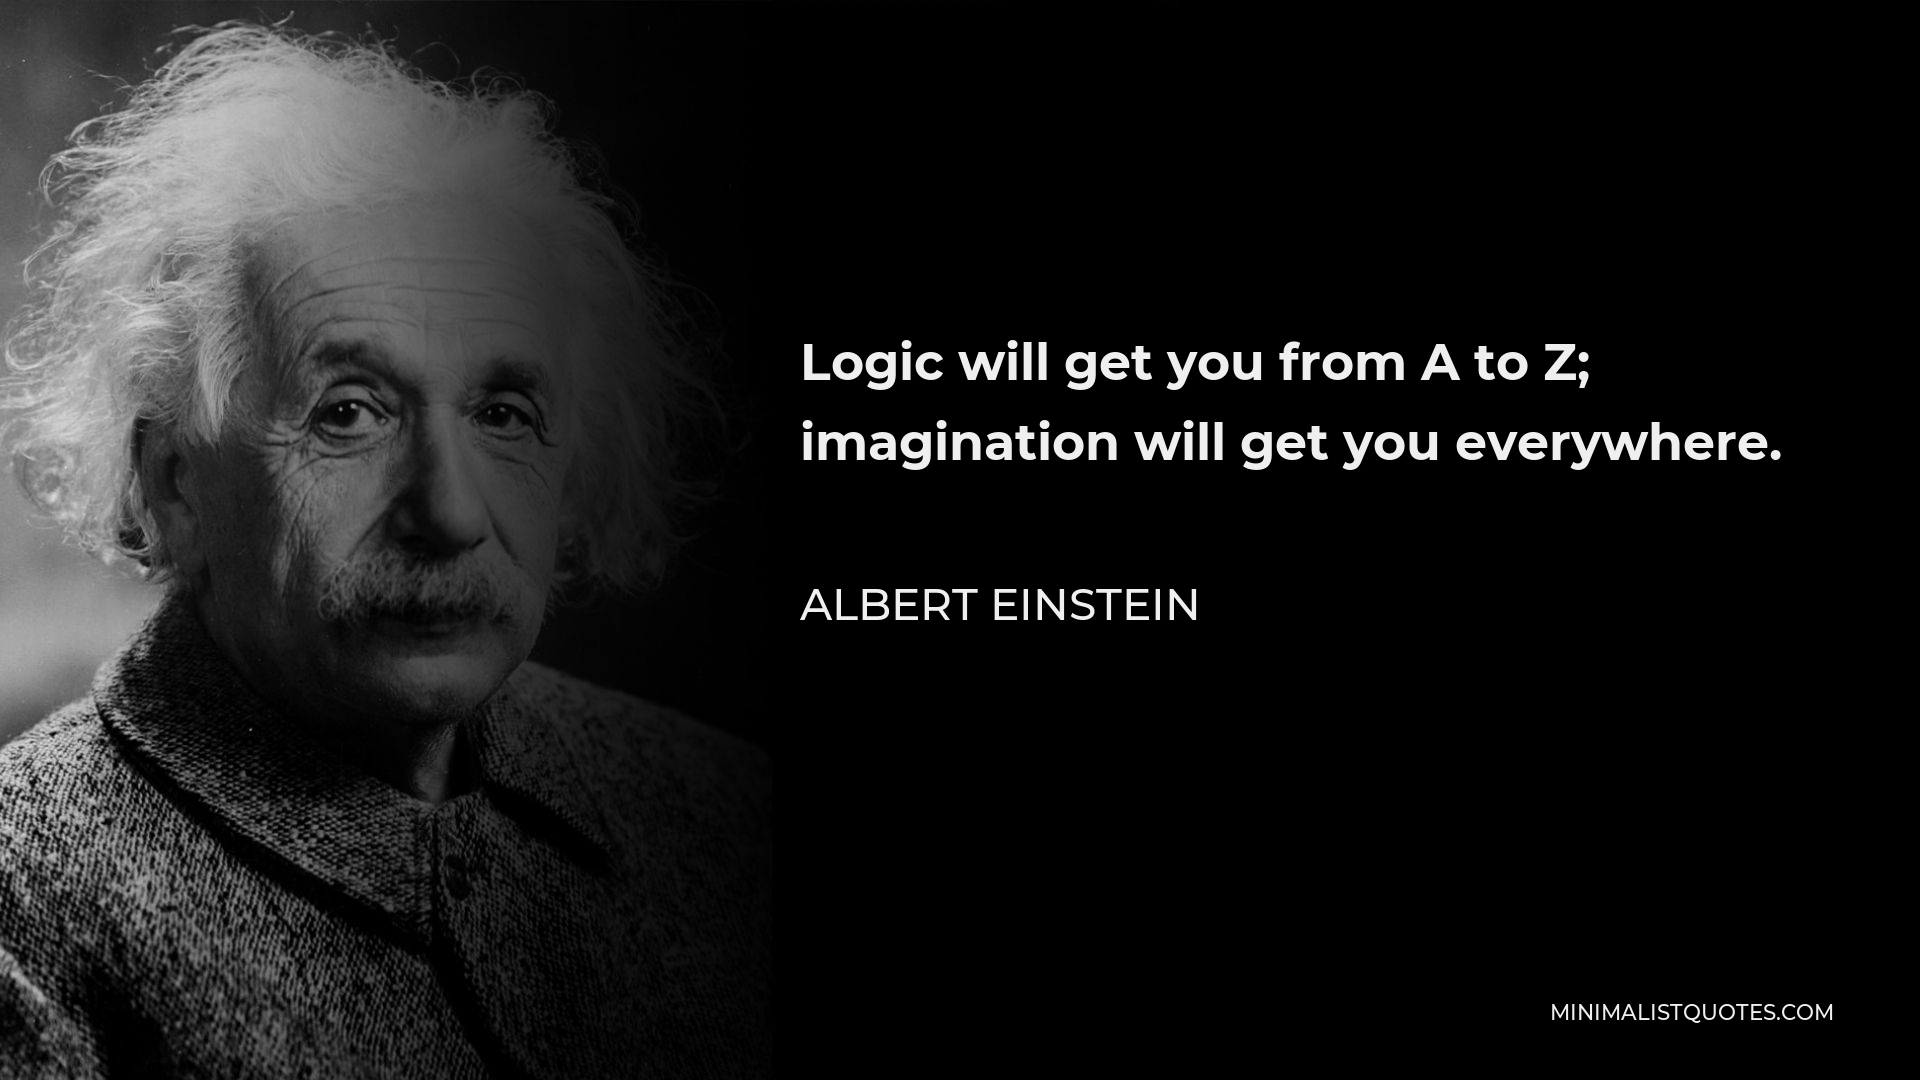 Albert Einstein Quote - Logic will get you from A to Z; imagination will get you everywhere.